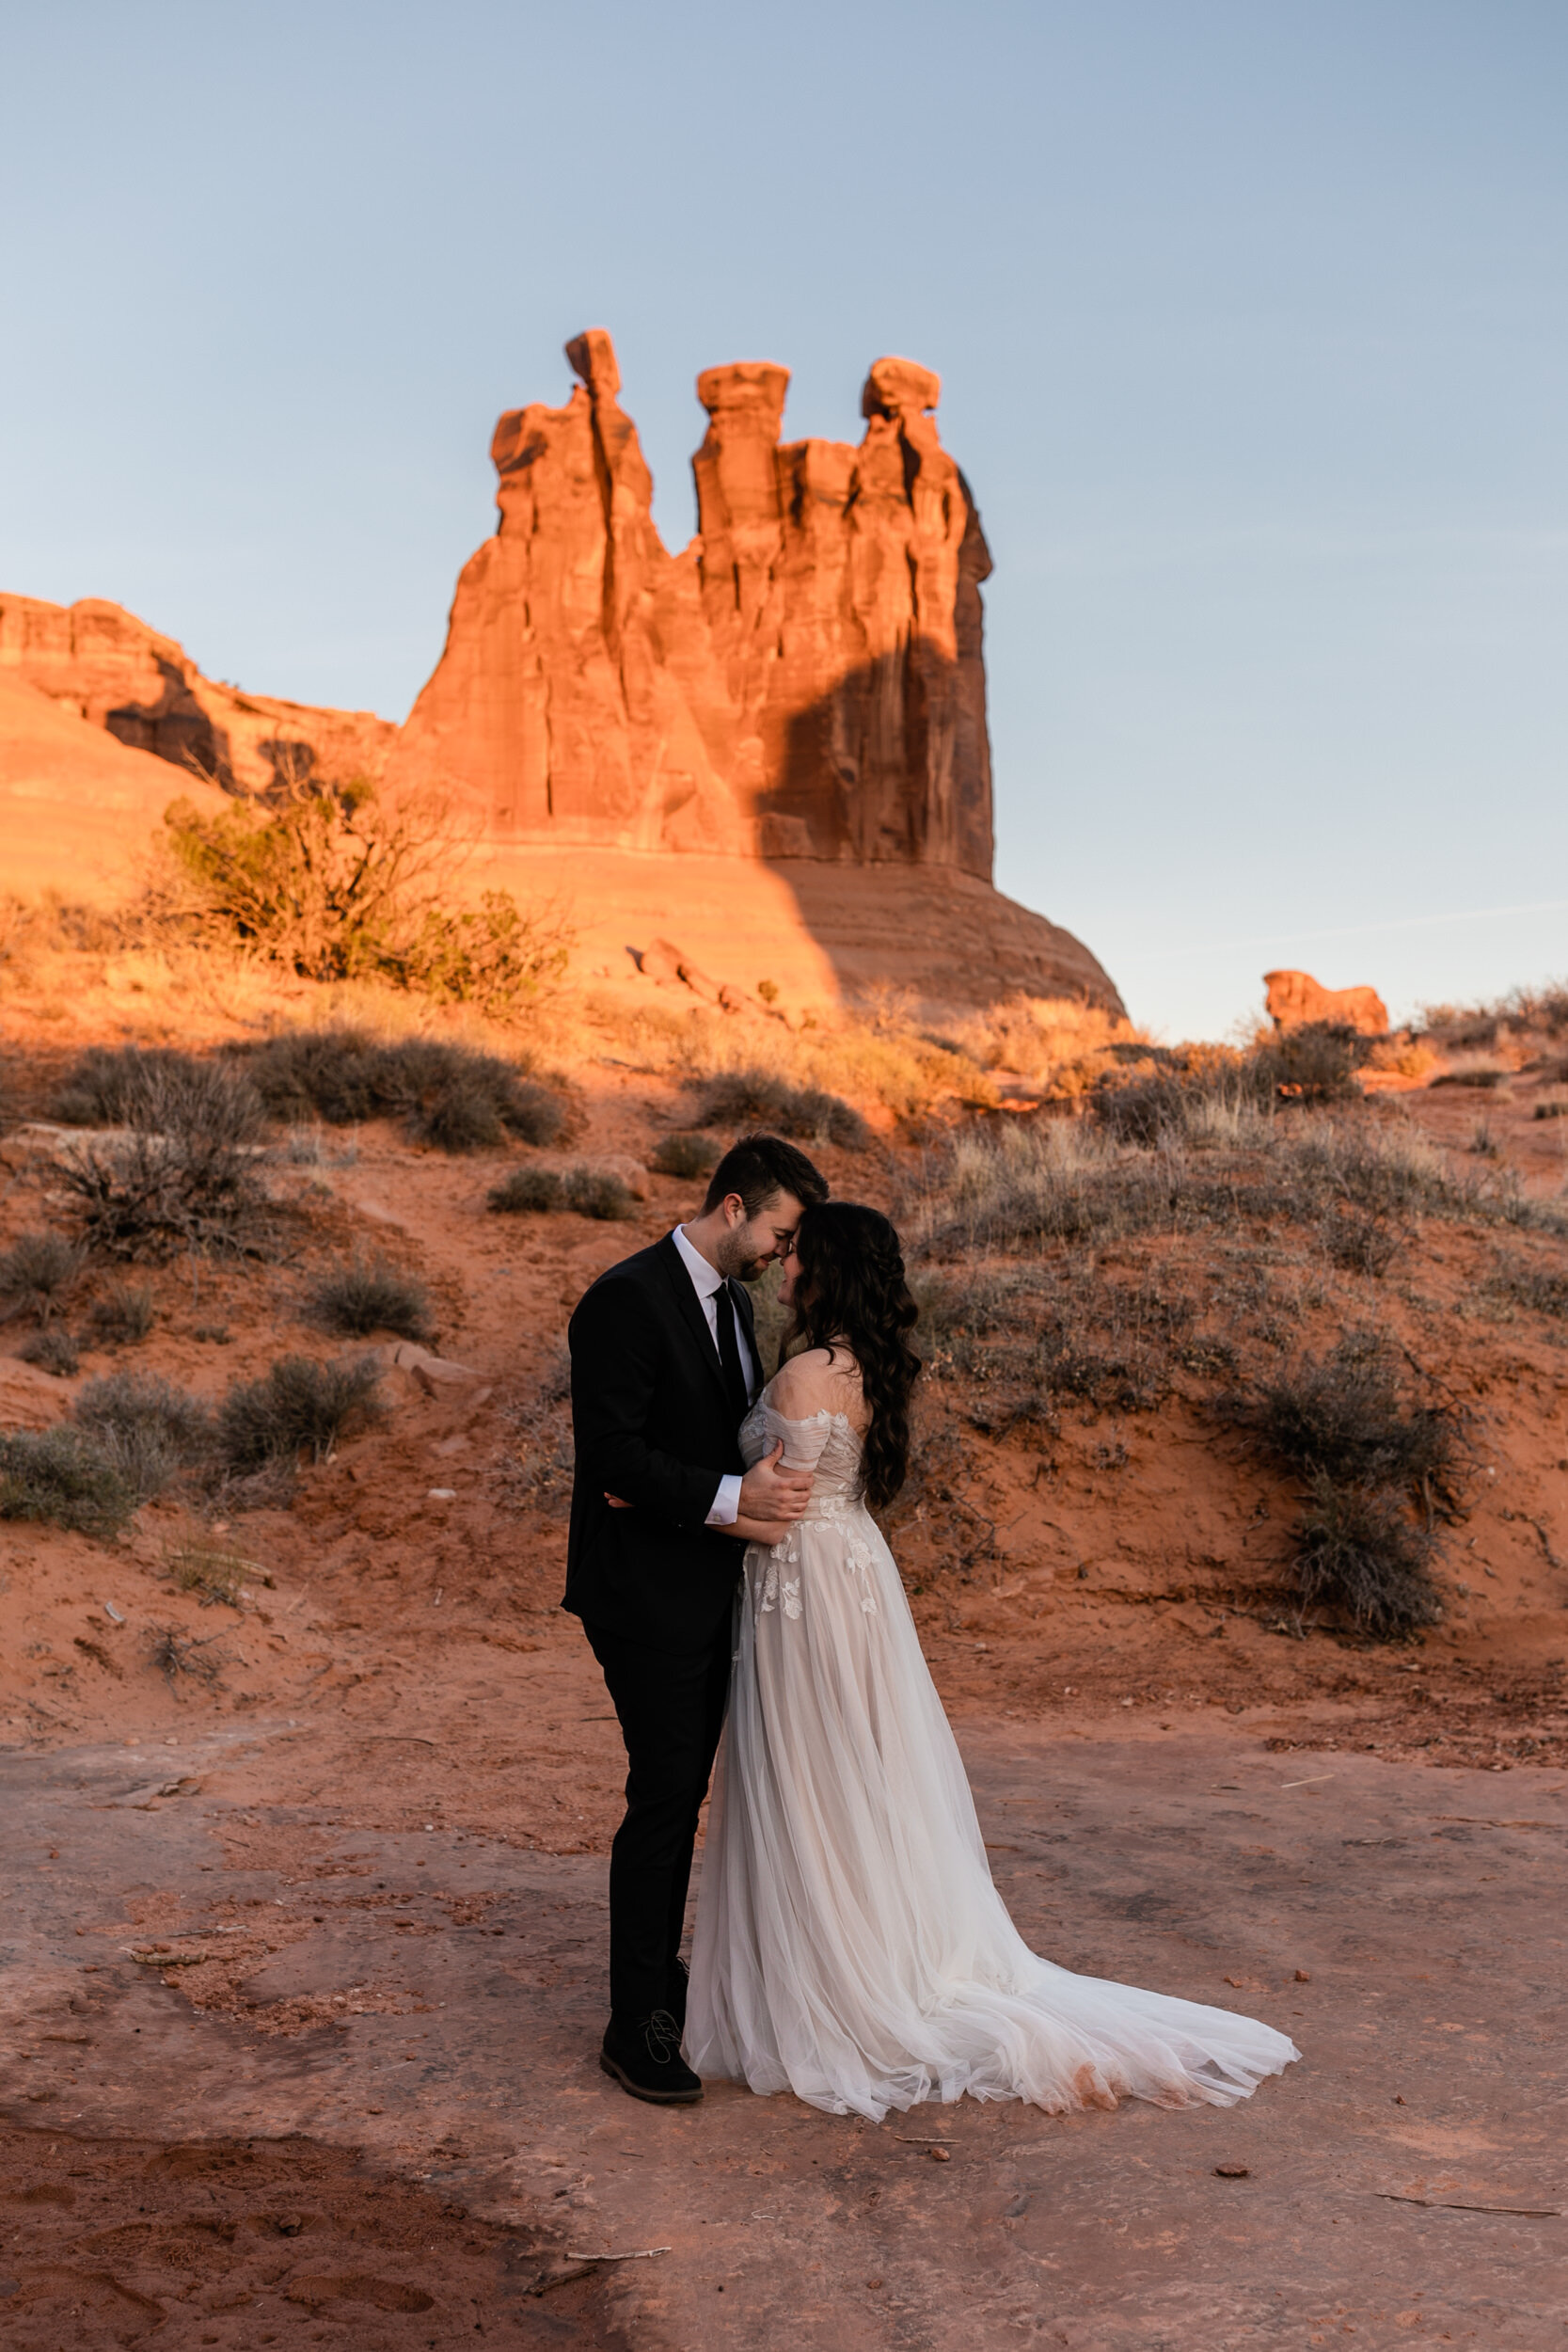 Moab Utah Elopement | Small Family Wedding Inspiration | The Hearnes Photography